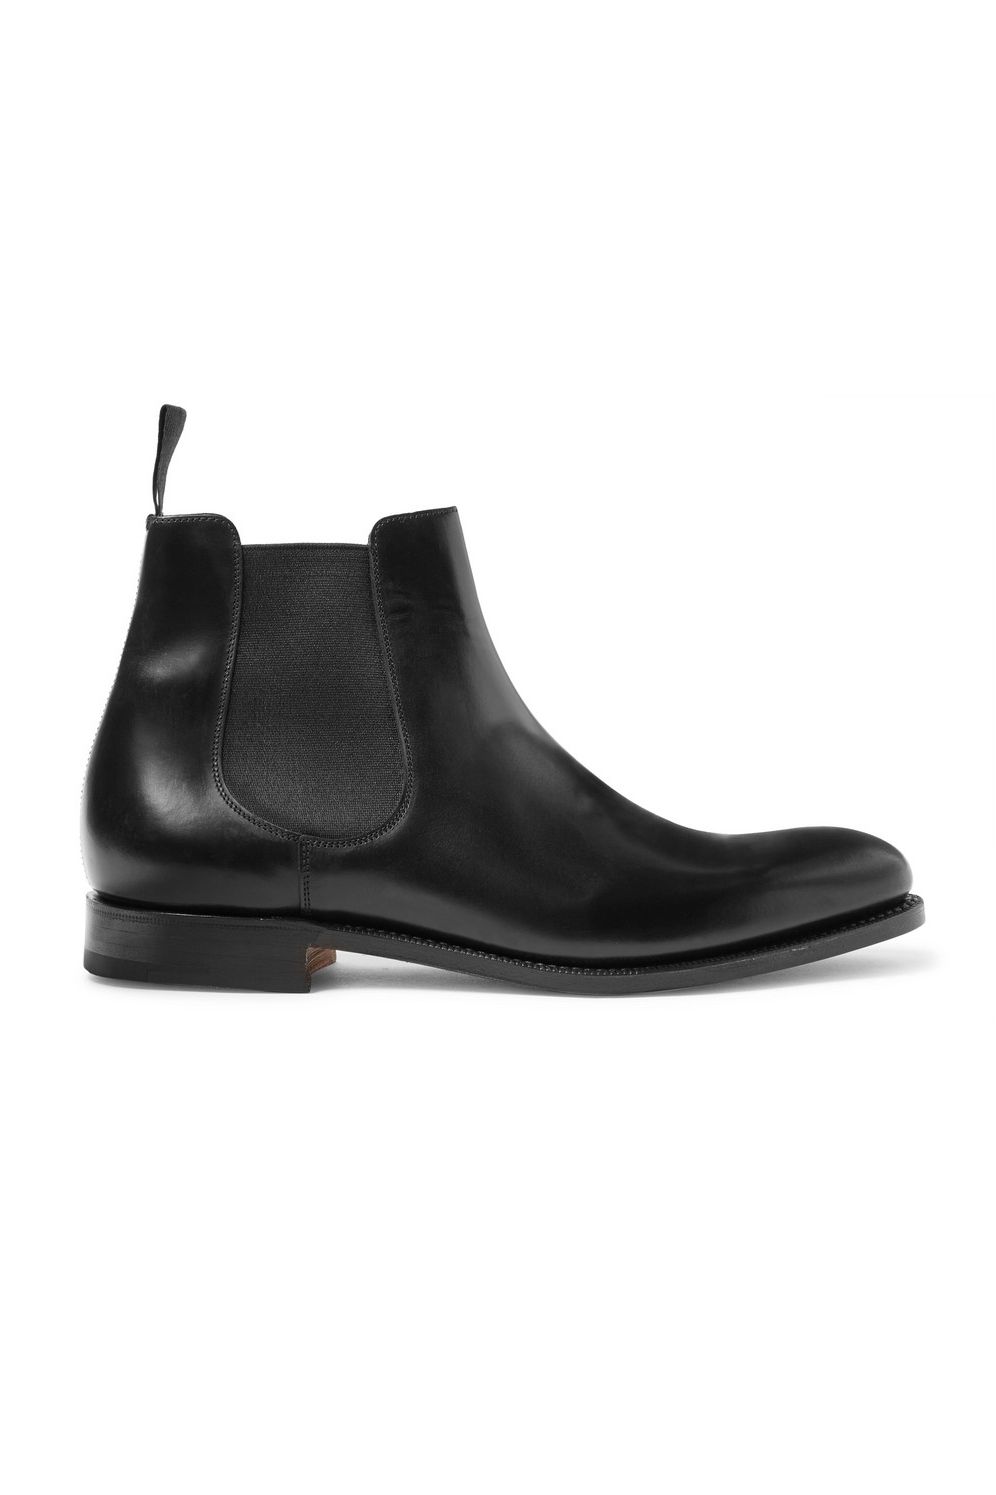 best black leather chelsea boots